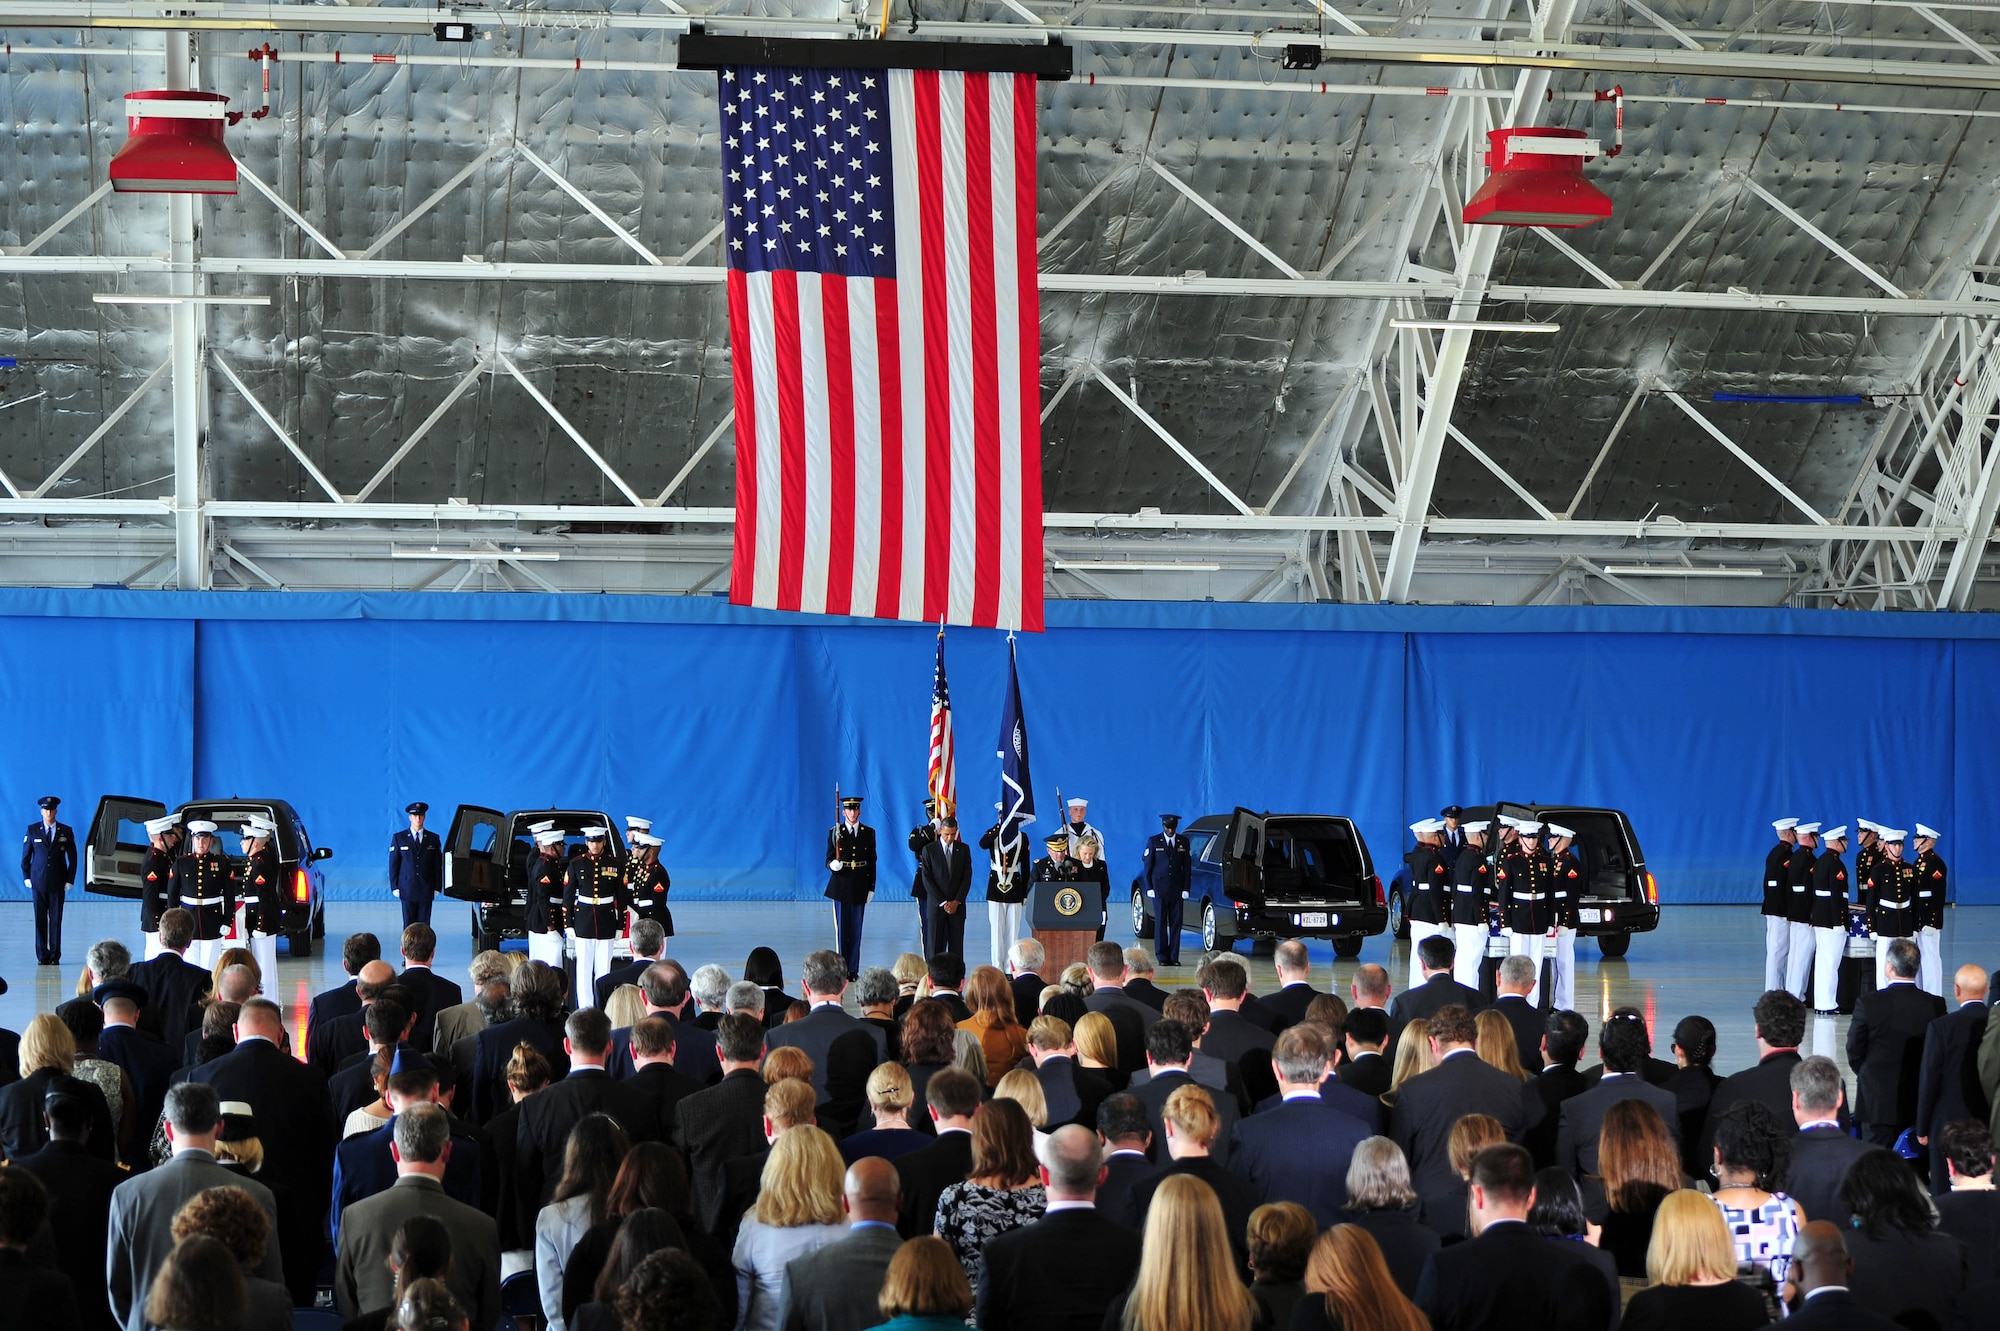 Joint Base Andrews hosts a dignified transfer ceremony Sept. 14 for U.S. Foreign Service members killed during attacks on the U.S. consulate Sept. 11, 2012, in Benghazi, Libya. President of the U.S. Barack Obama and Secretary of State Hillary Rodham Clinton both shared remarks remembering U.S. Ambassador J. Christopher Stevens and State Department members Sean P. Smith, Glen A. Doherty and Tyrone S. Woods. (U.S. Air Force photo by Senior Airman Steele C. G. Britton)